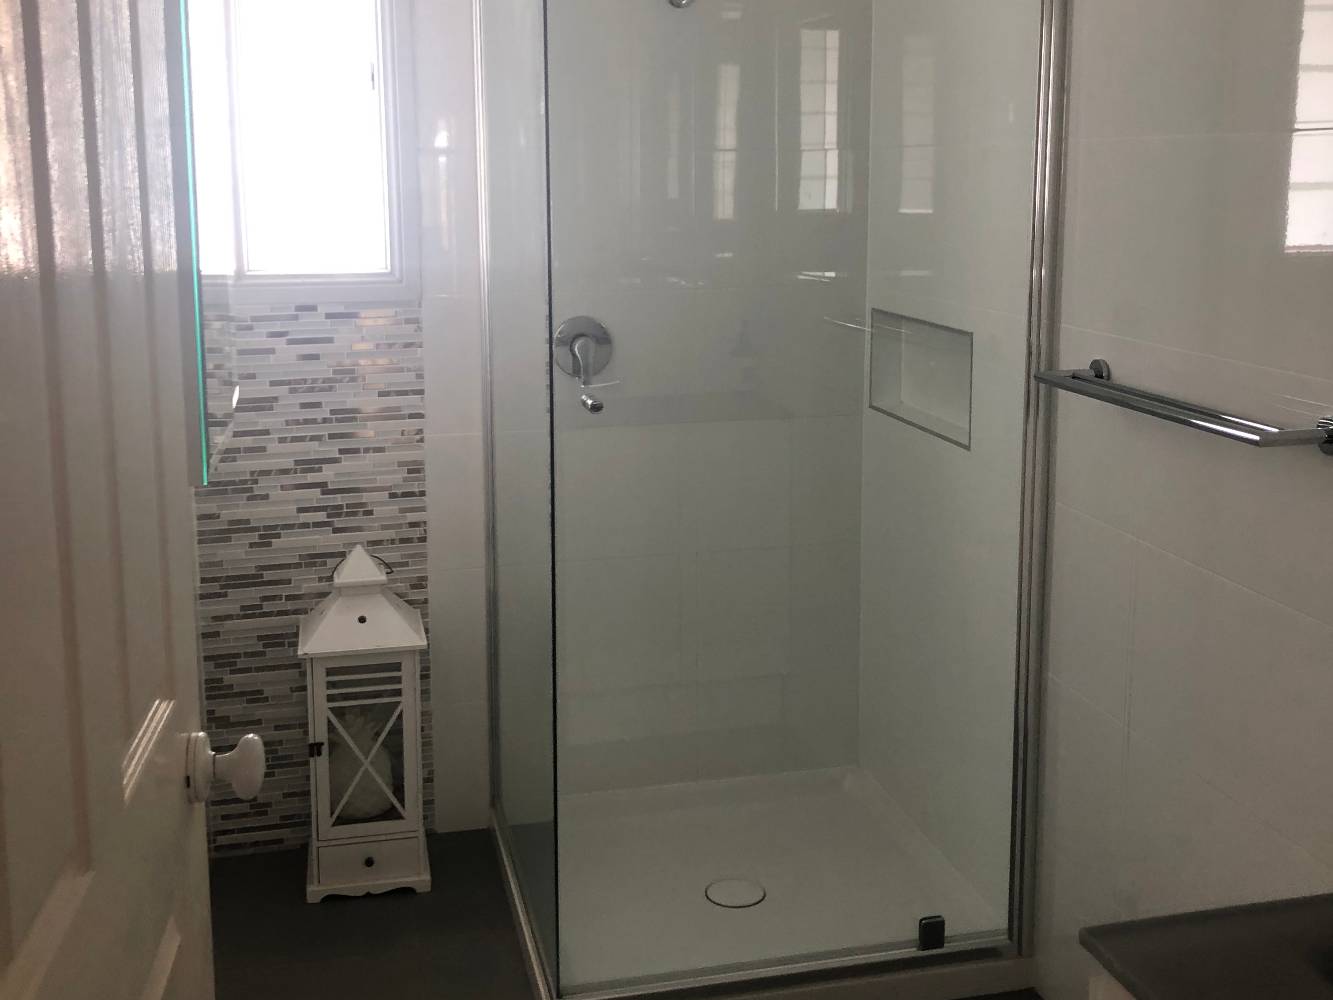 Renovated bathroom (sorry for the poor cropping, we can send the original photo through if interested!)